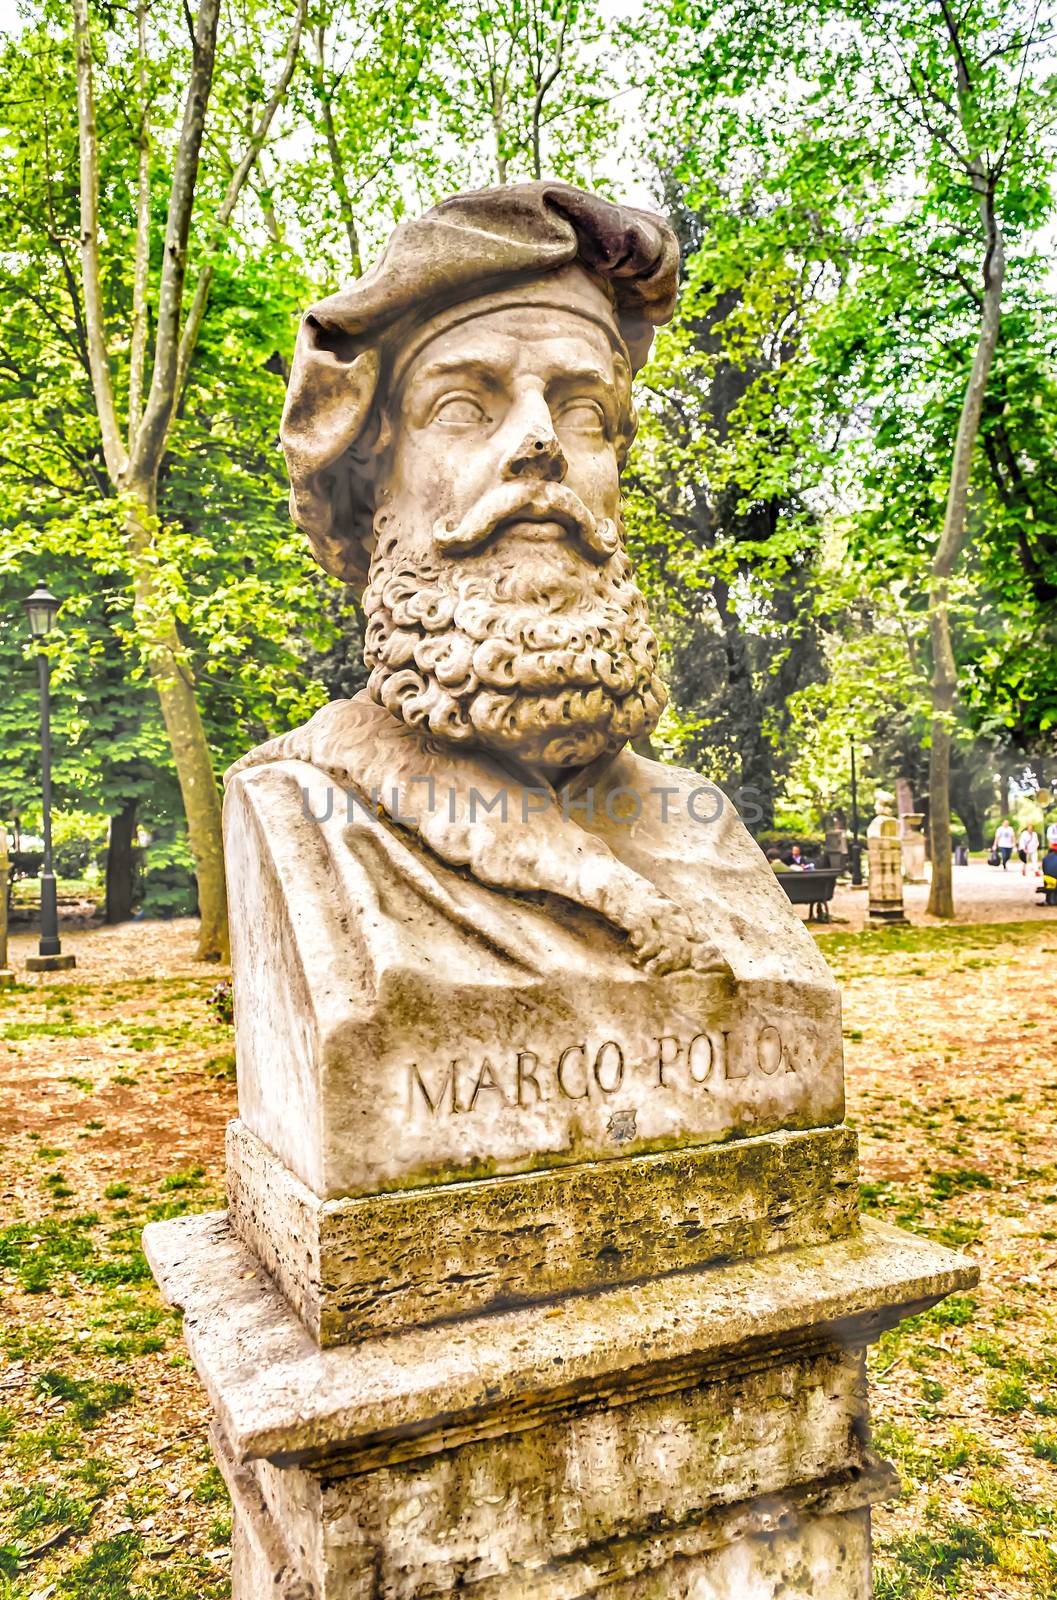 Bust statue of Marco Polo. Sculpture in Villa Borghese park, Rom by marcorubino